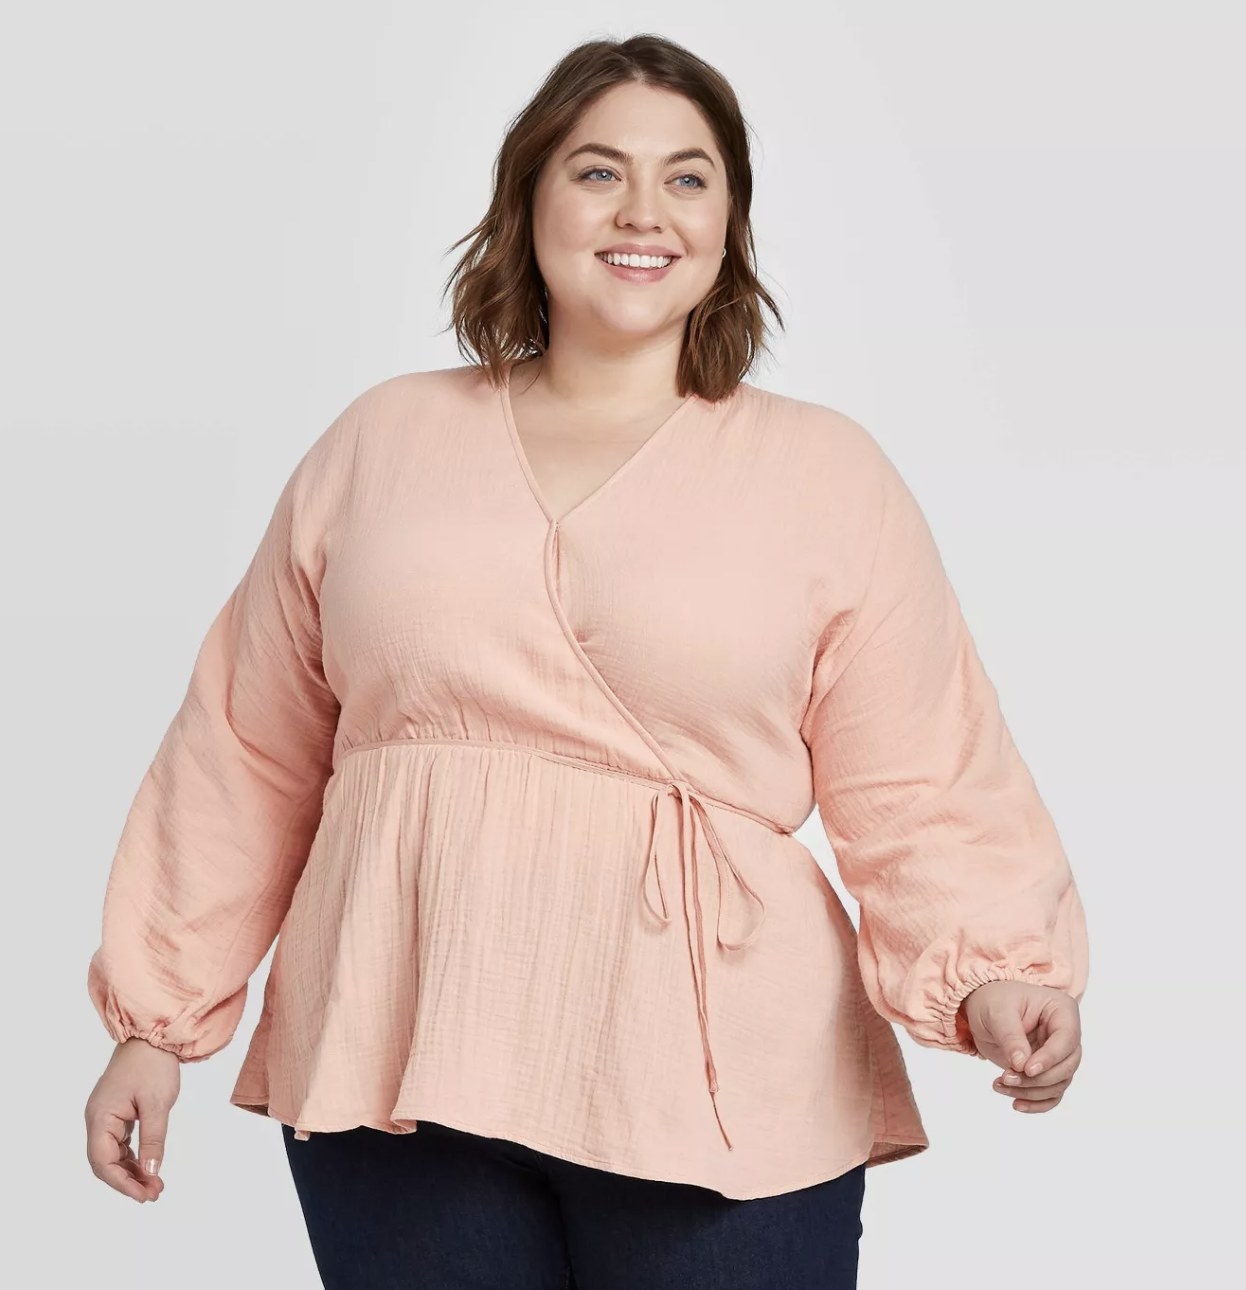 31 Pieces Of Plus-Size Clothing You Can Get At Target That Are